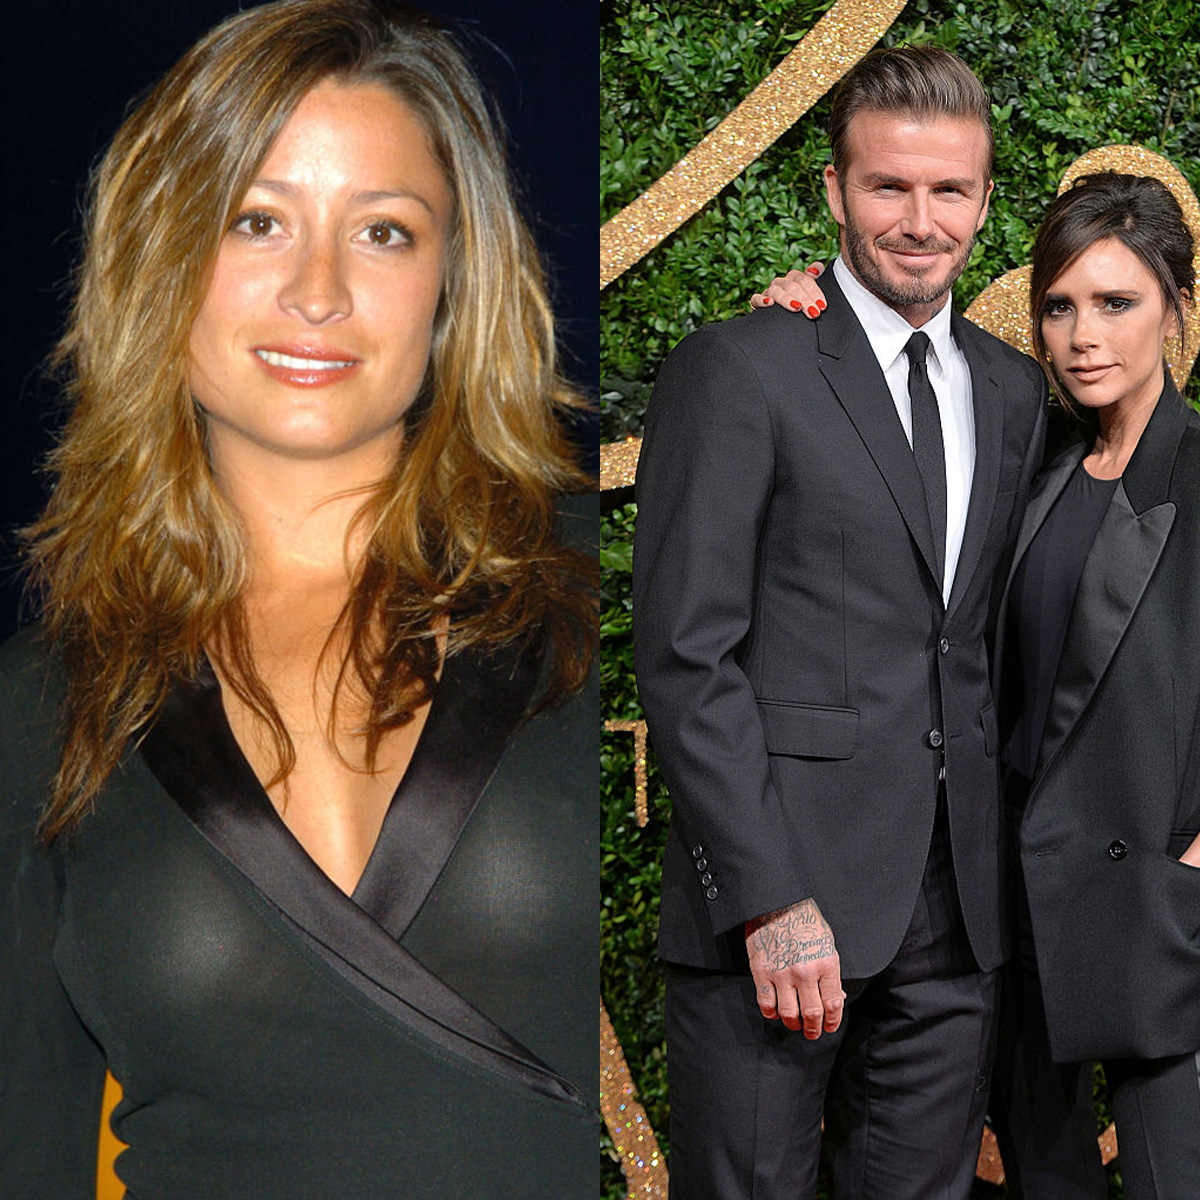 Rebecca Loos Claims She Caught David Beckham in Bed With a Model